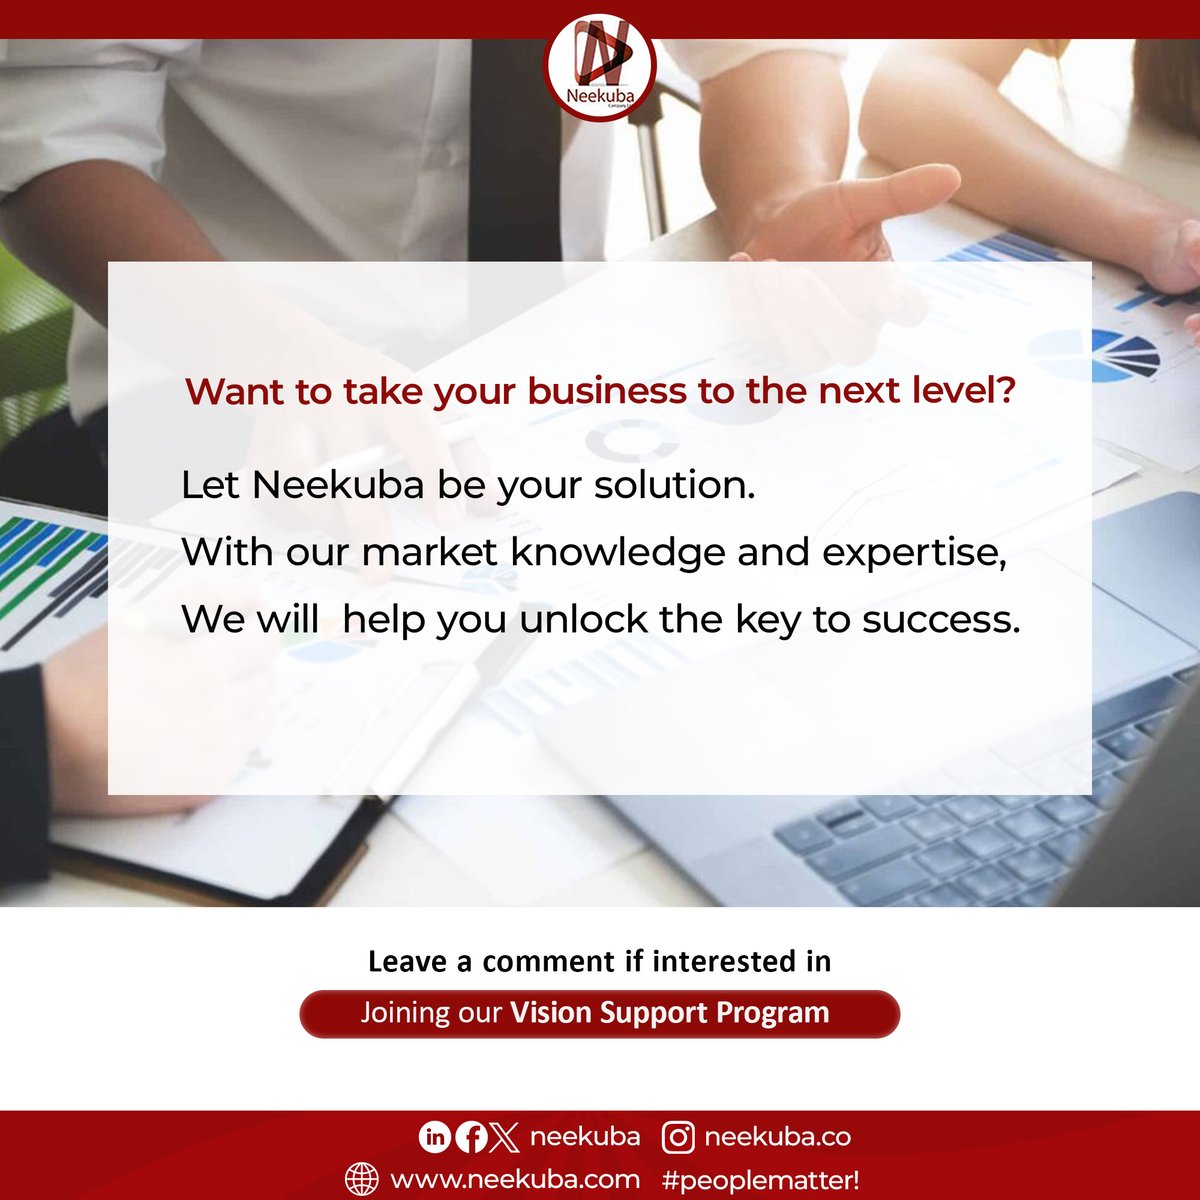 Let Neekuba be your solution. With our market knowledge and expertise, we will help you unlock the key to success.

leave a comment if interested in joining our Vision Support Program

#neekuba #peoplematter #businessboost #business #marketknowledge #success